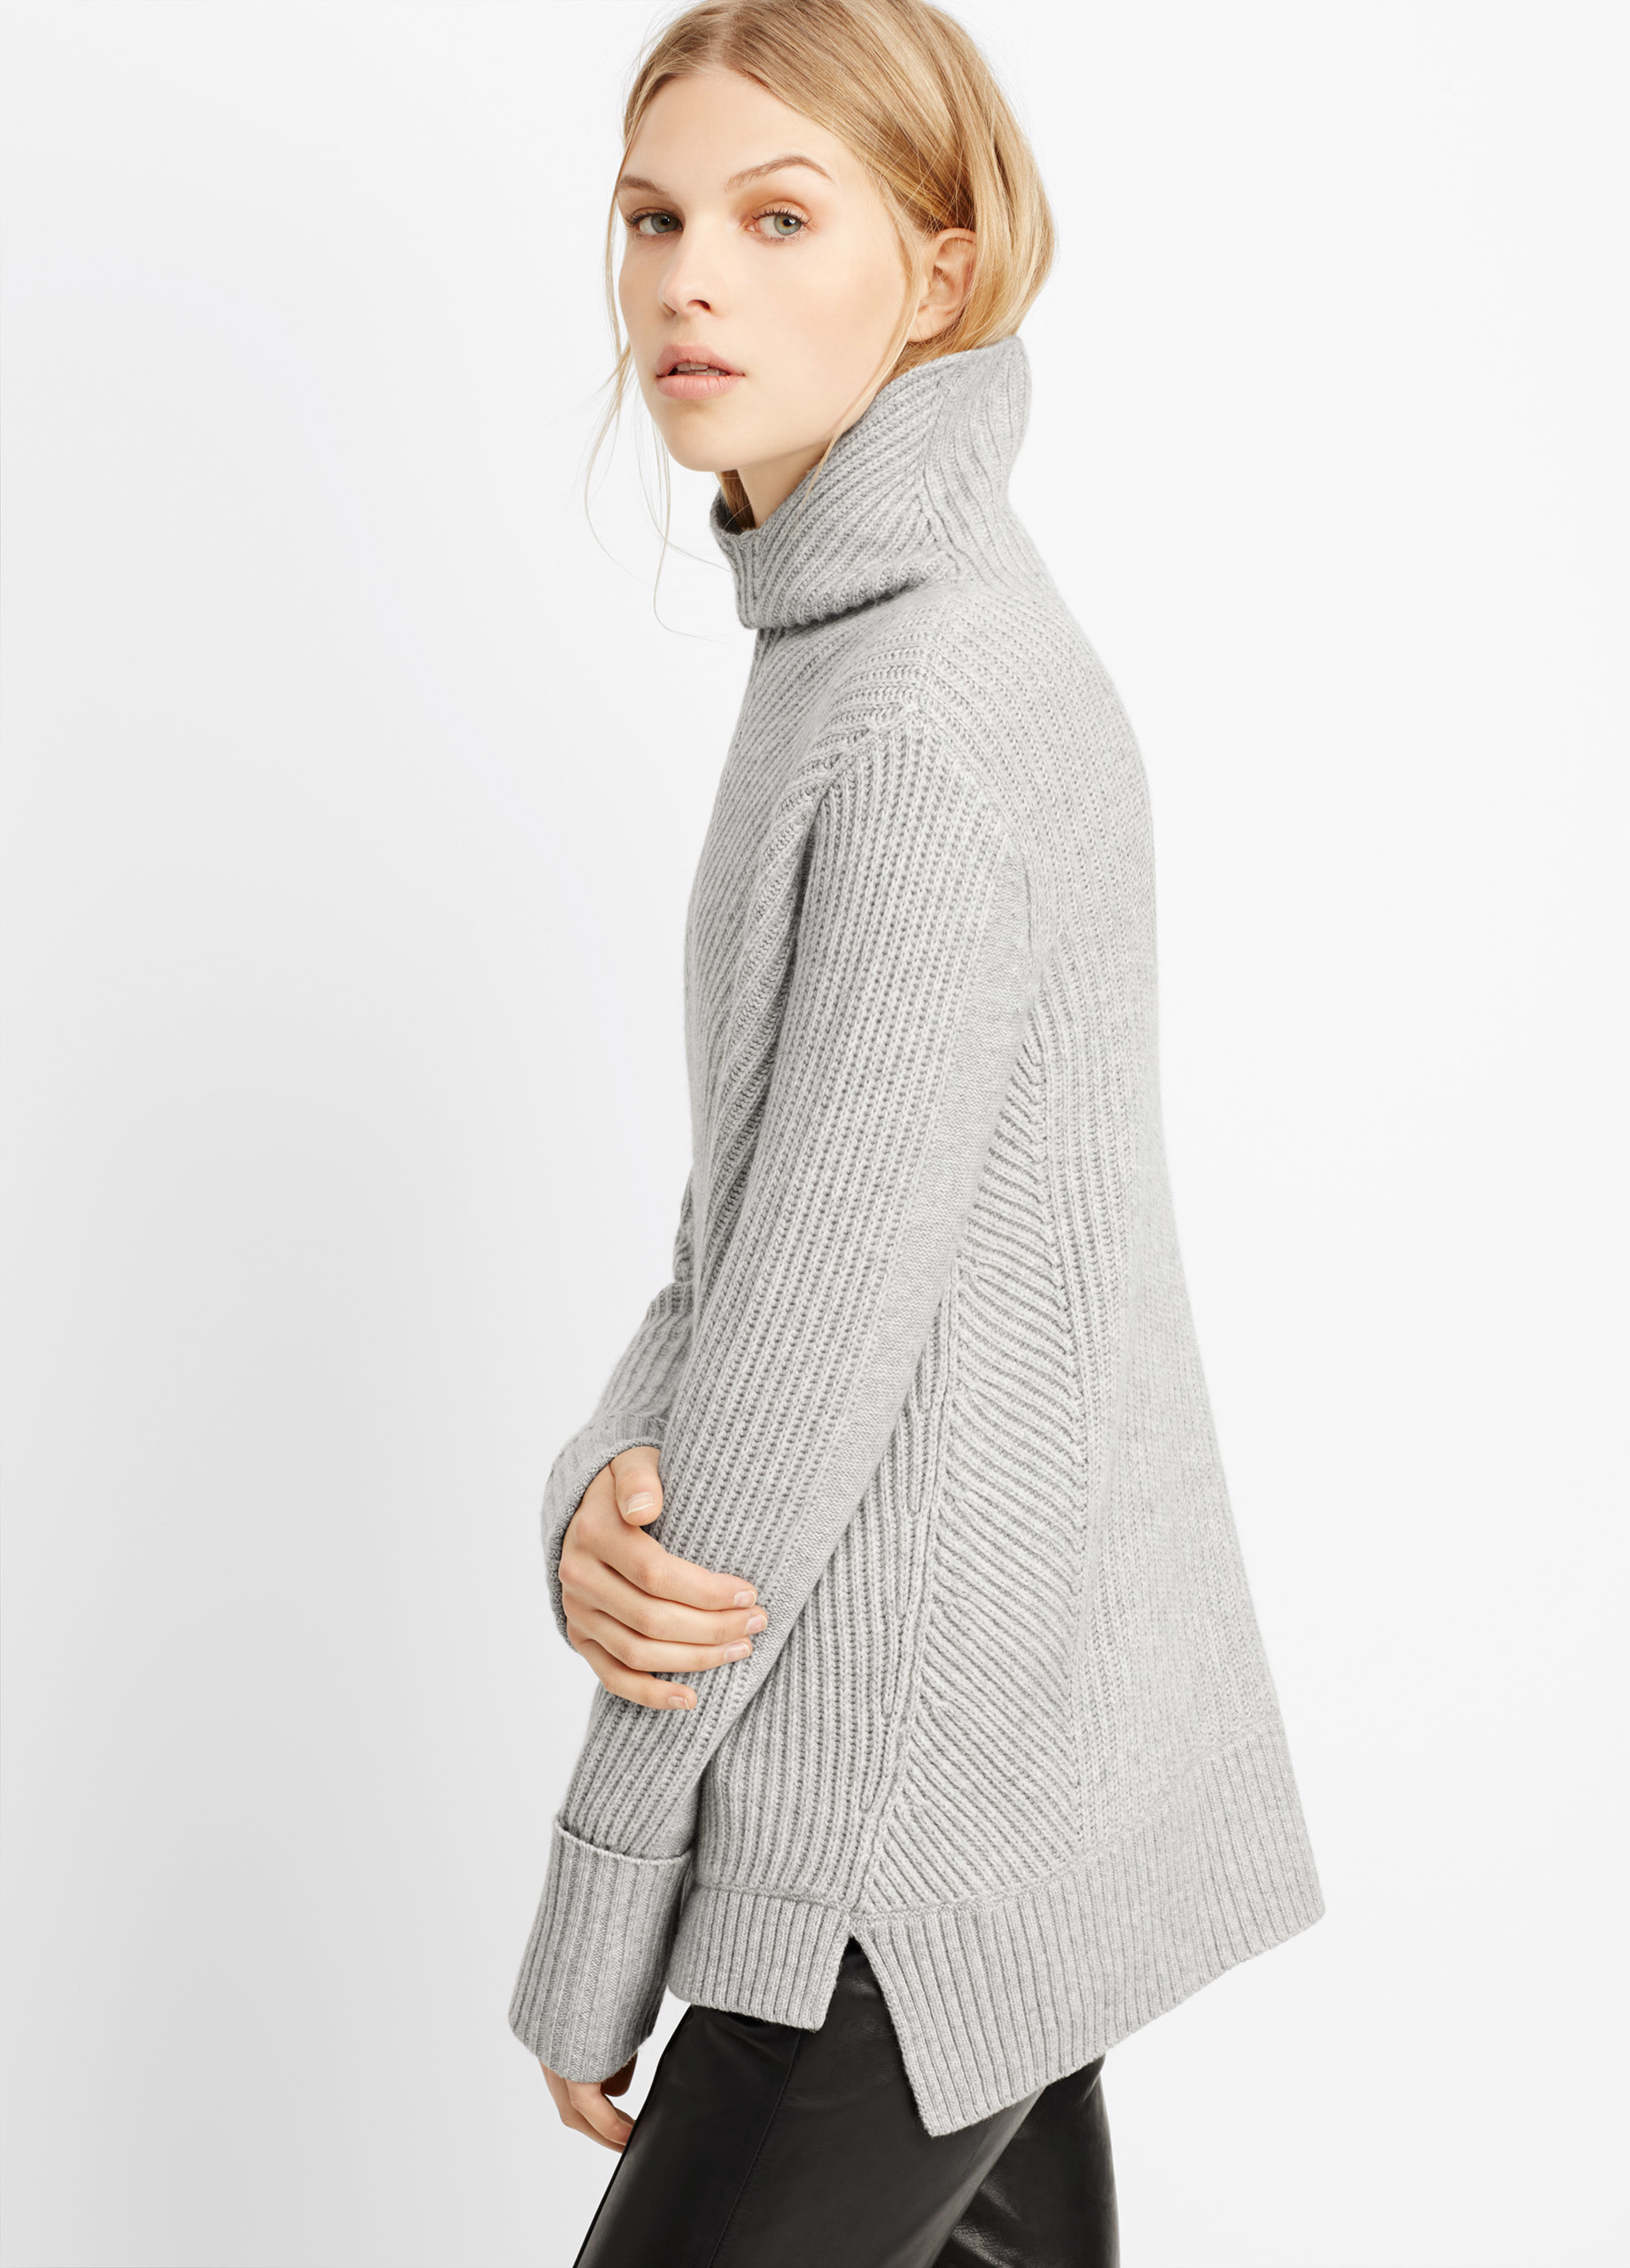 Vince Wool Cashmere Directional Rib Turtleneck Sweater in Gray | Lyst